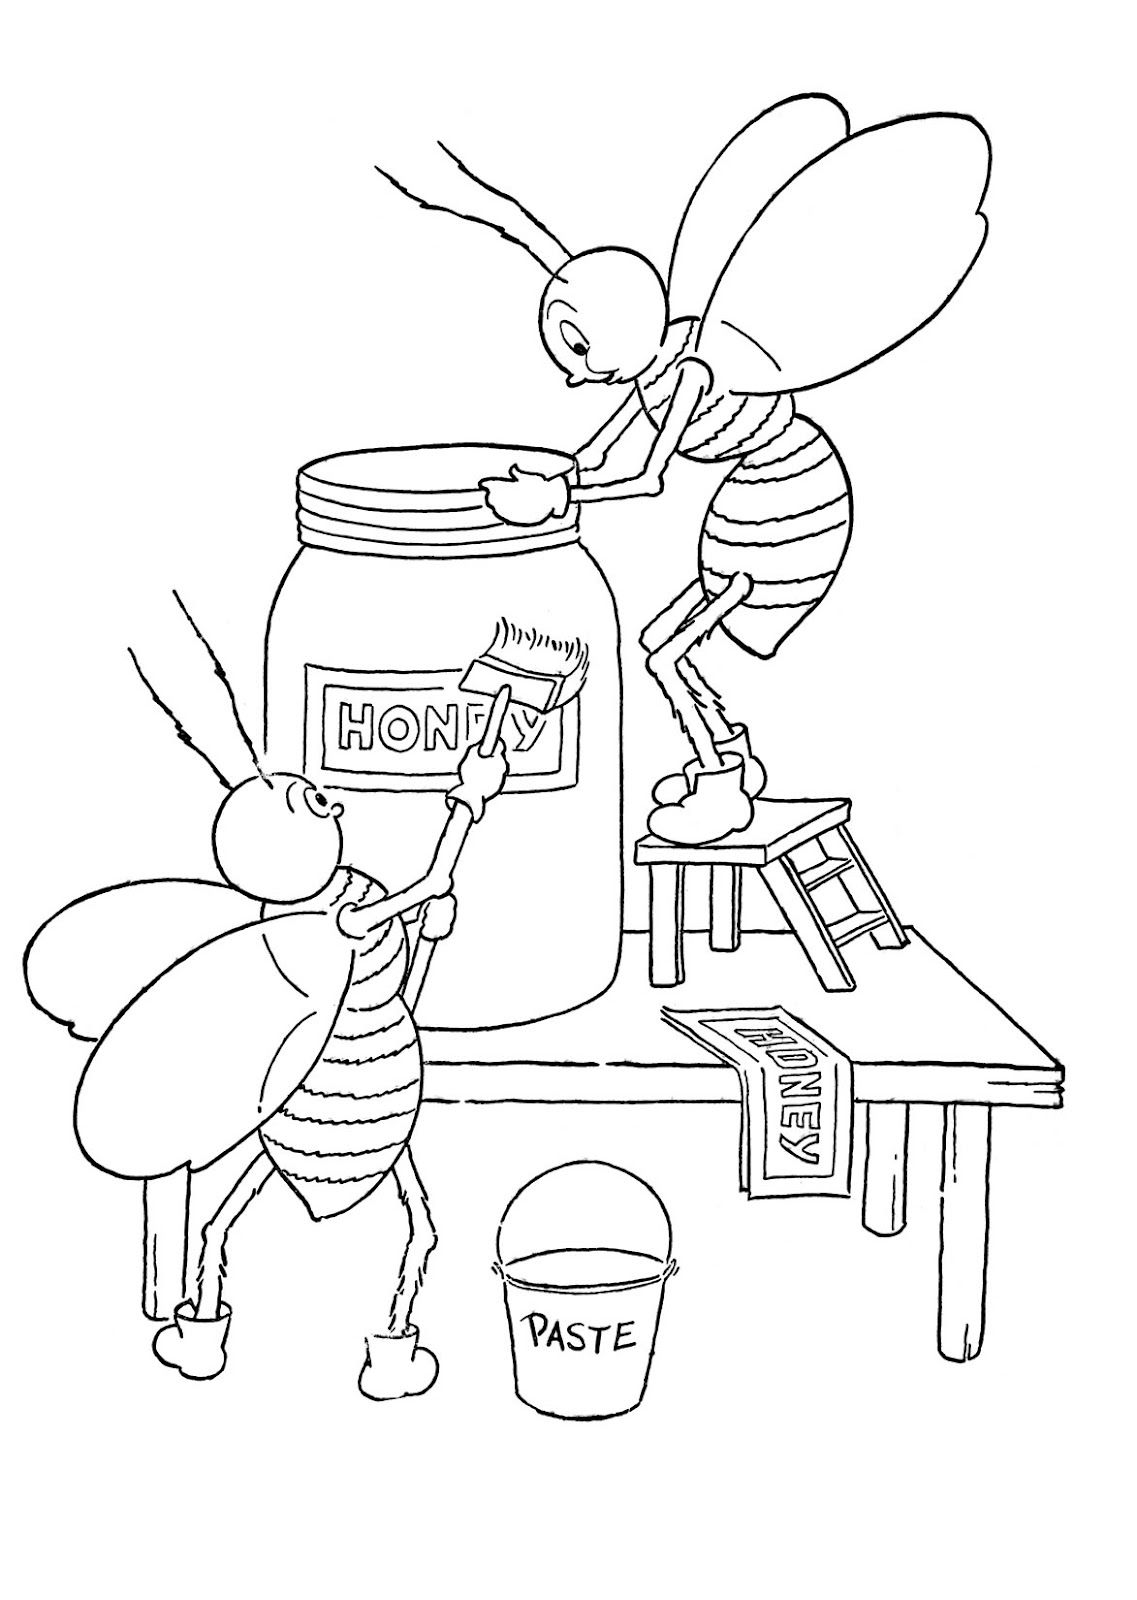 Kids Printable - Honey Bees Coloring Page - The Graphics Fairy | Bee  coloring pages, Bee drawing, Coloring pages